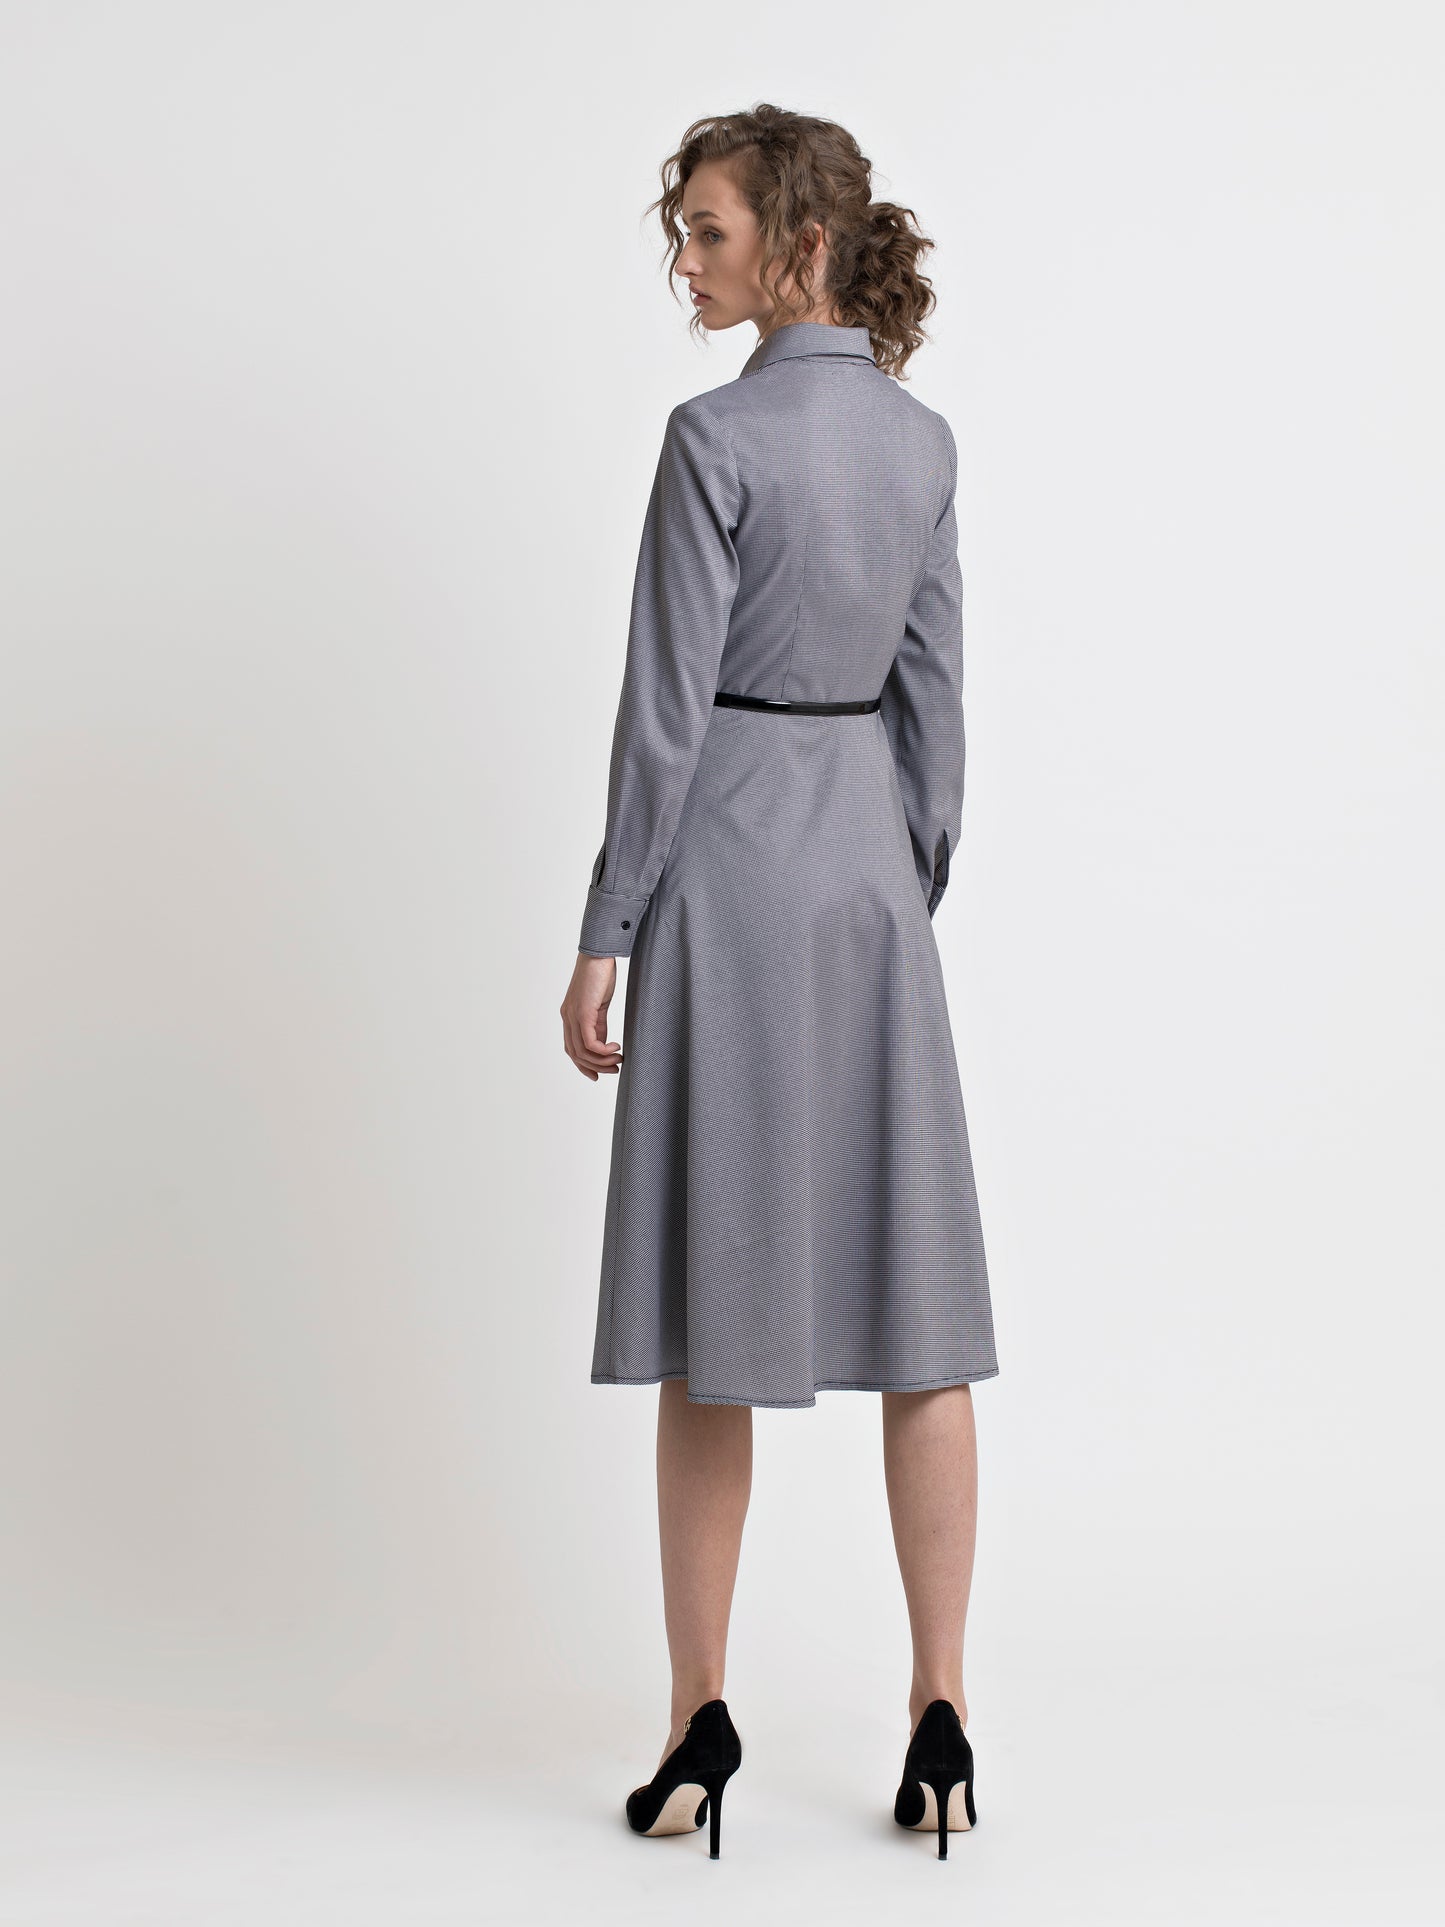 Back view of a female model, wearing high heel black shoes, and a semi fitted black and white check shirt dress with a patent leather black narrow belt. From the RÉZO women's collection.